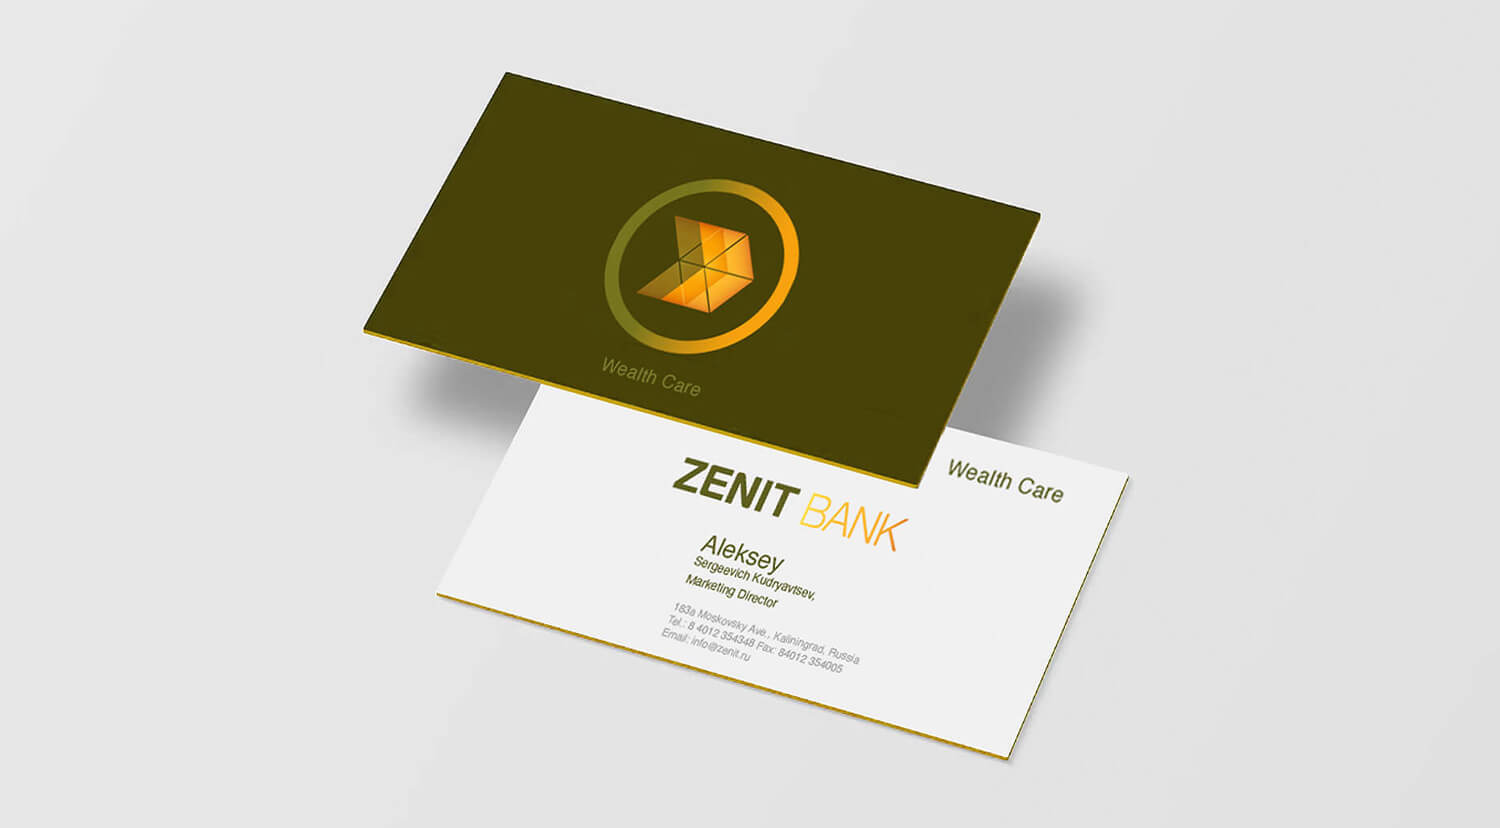 Zenit Bank Russia, Wealth Management Business Card Branding, Brand Identity - Campbell Rigg Agency